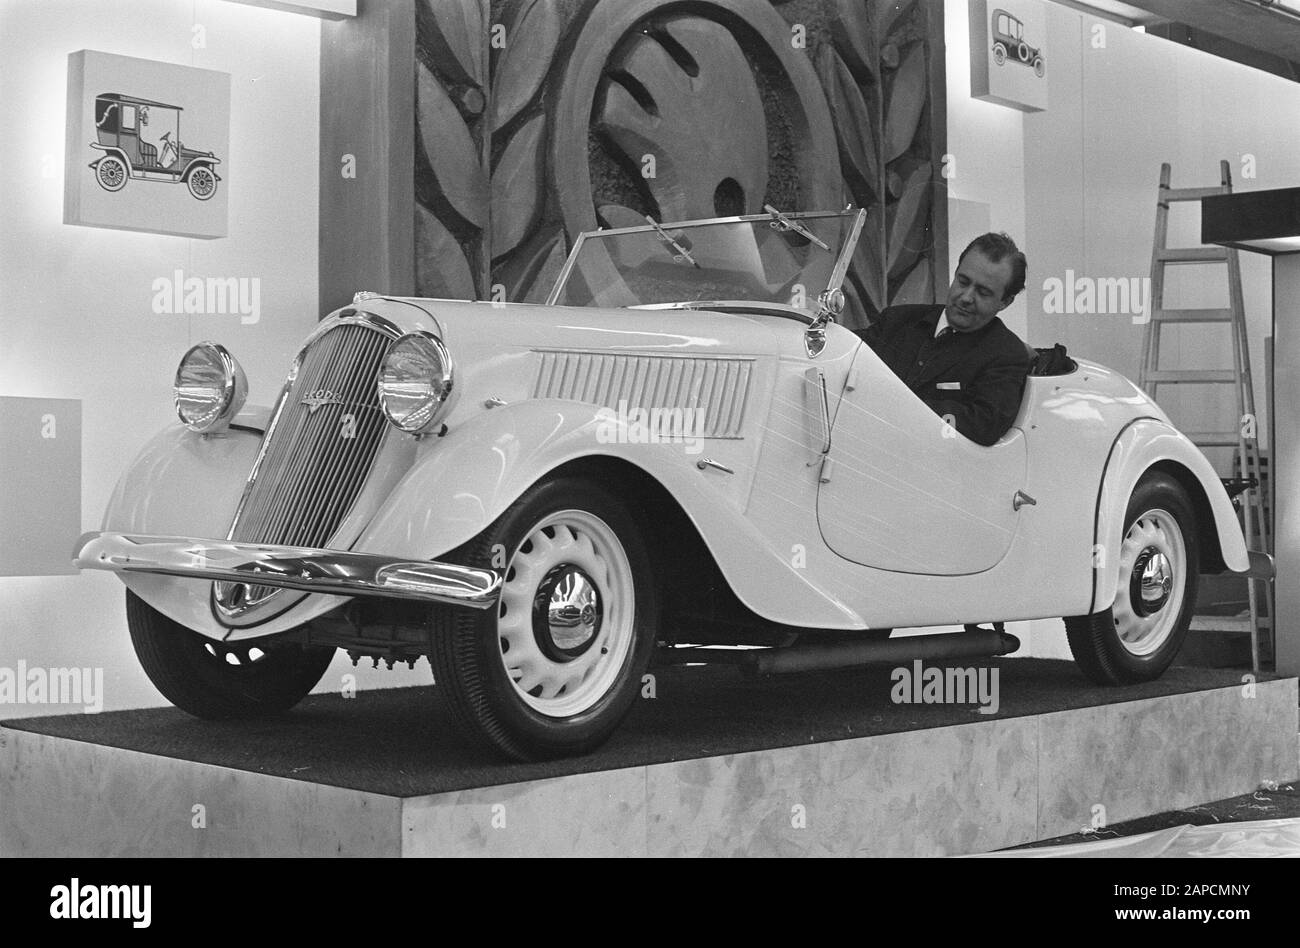 Next Thursday begins 58th RAI exhibition of passenger cars. The oldest car on the exhibition a Skoda from 1934 Date: 11 February 1969 Location: Amsterdam Keywords: cars, car trade, fairs, exhibitions Institution name: Skoda Stock Photo